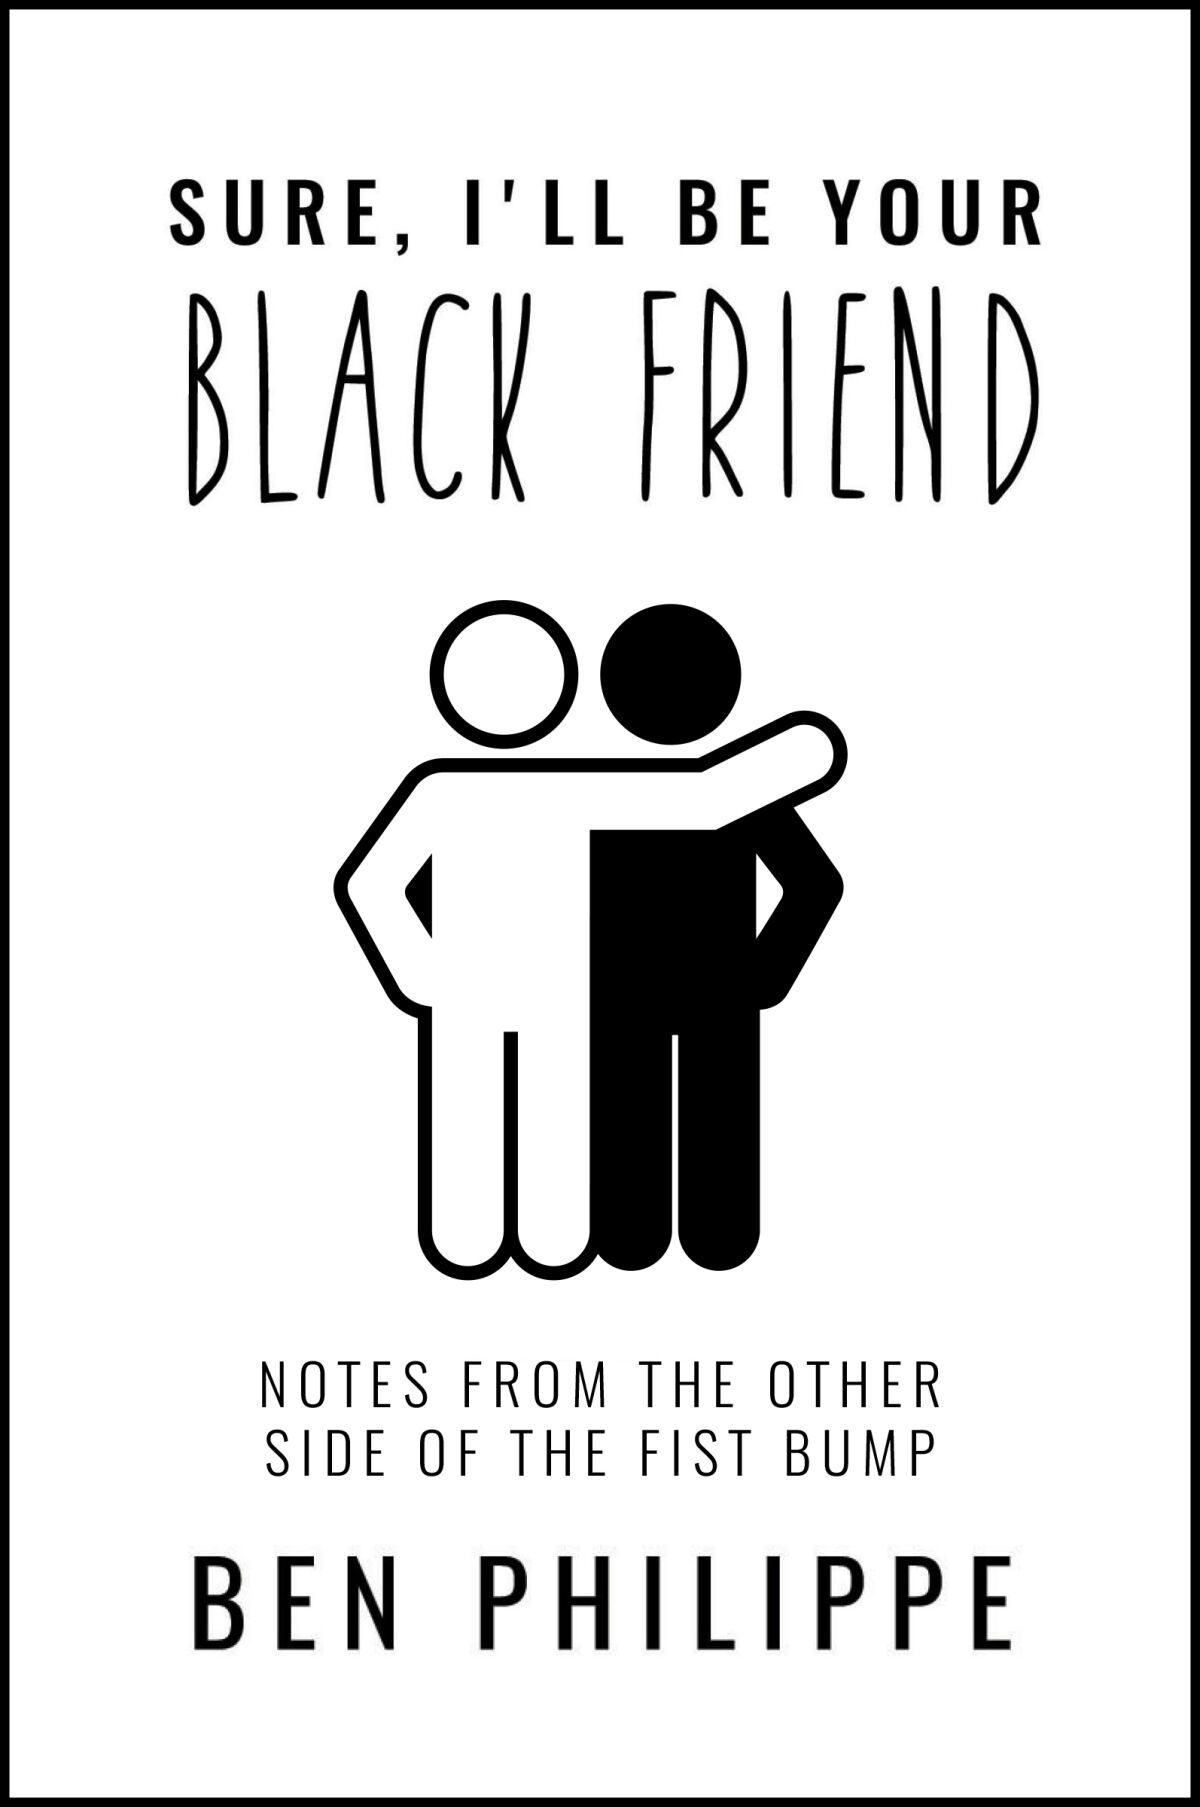 The cover of "Sure, I'll Be Your Black Friend" by Ben Philippe.